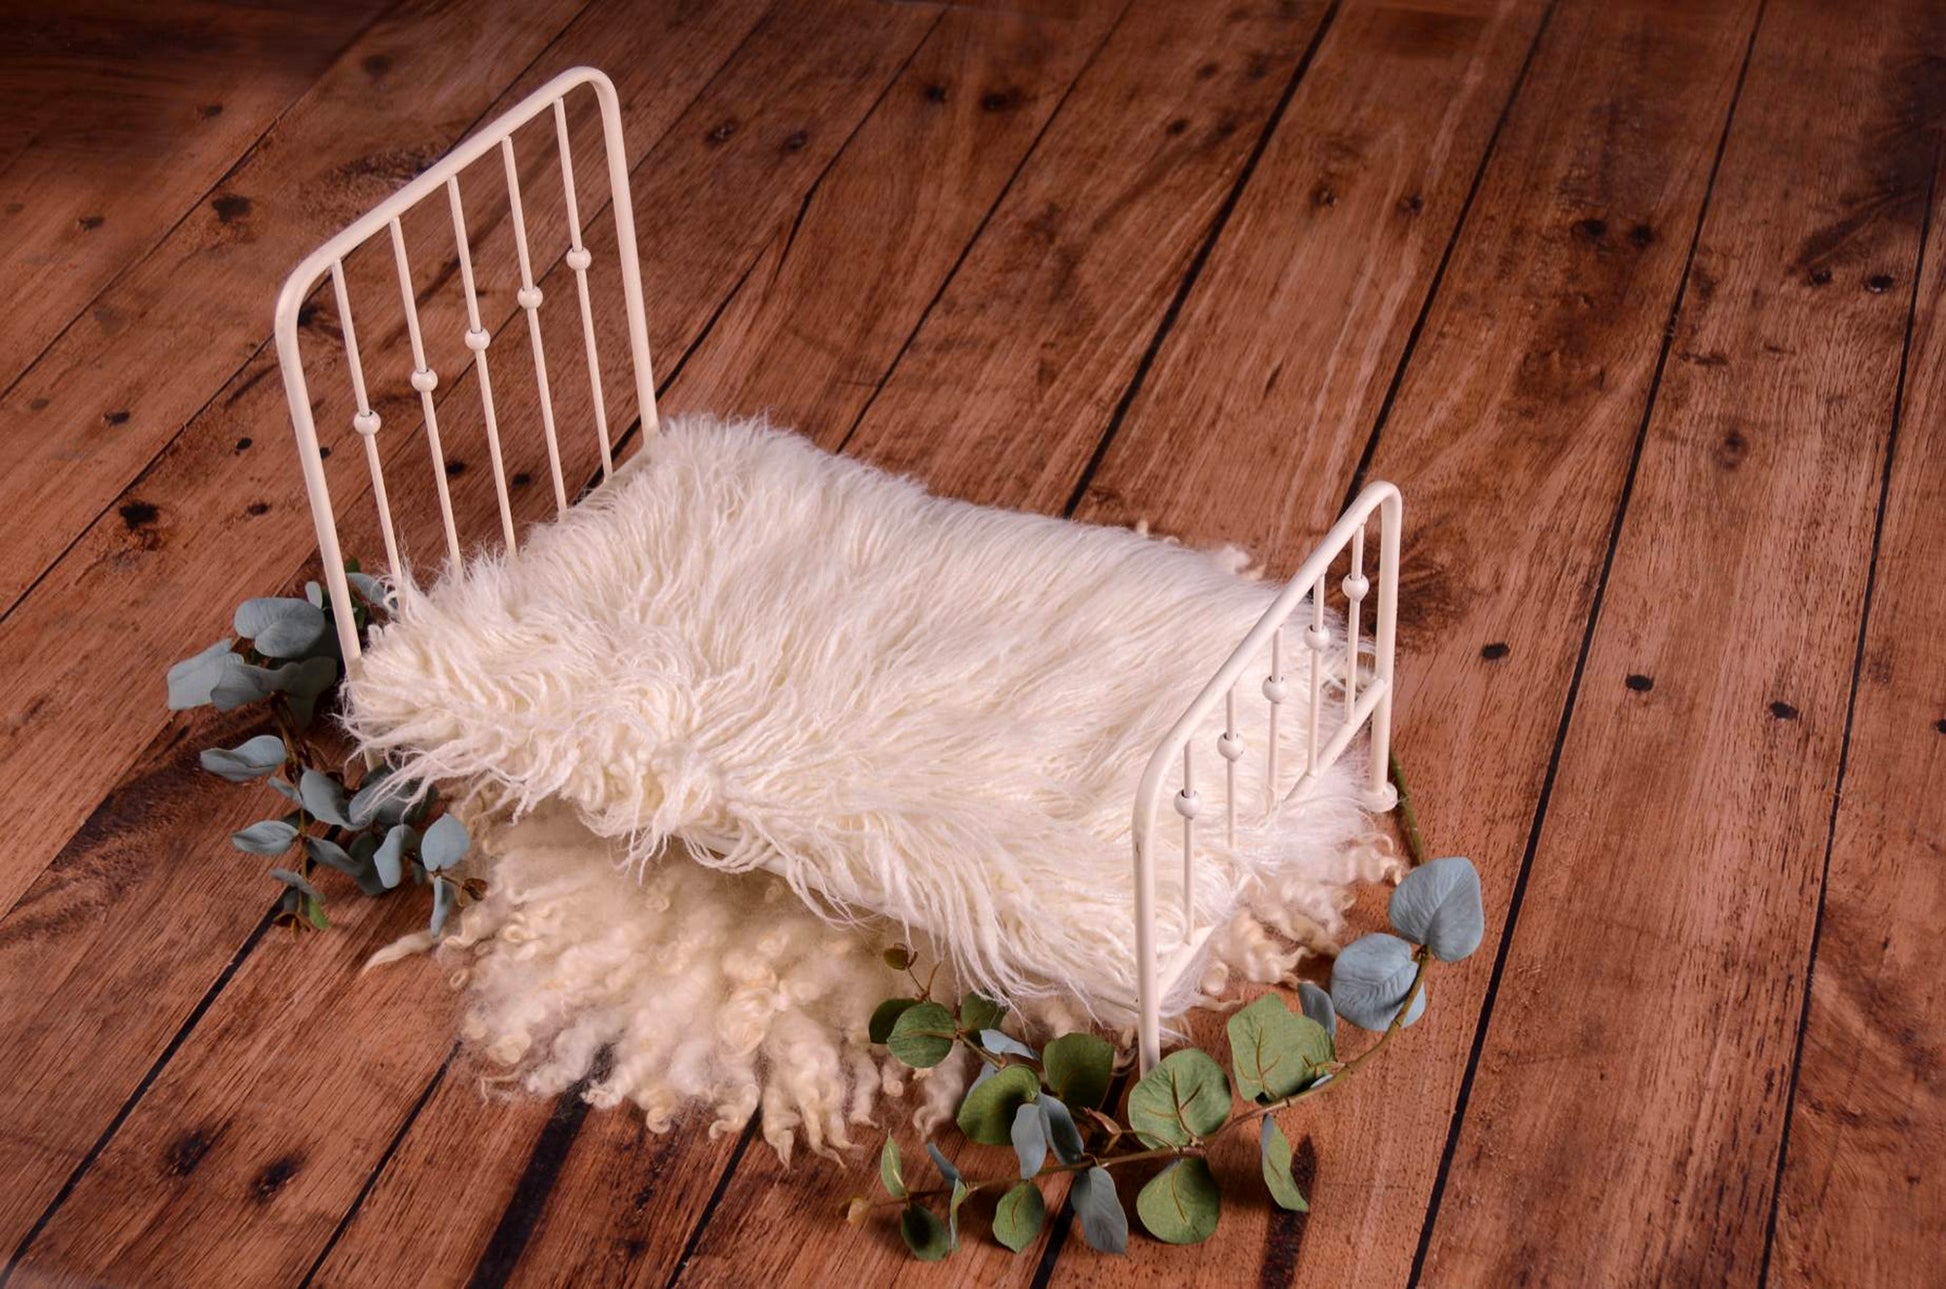 Vintage Bed - White Model 2-Newborn Photography Props